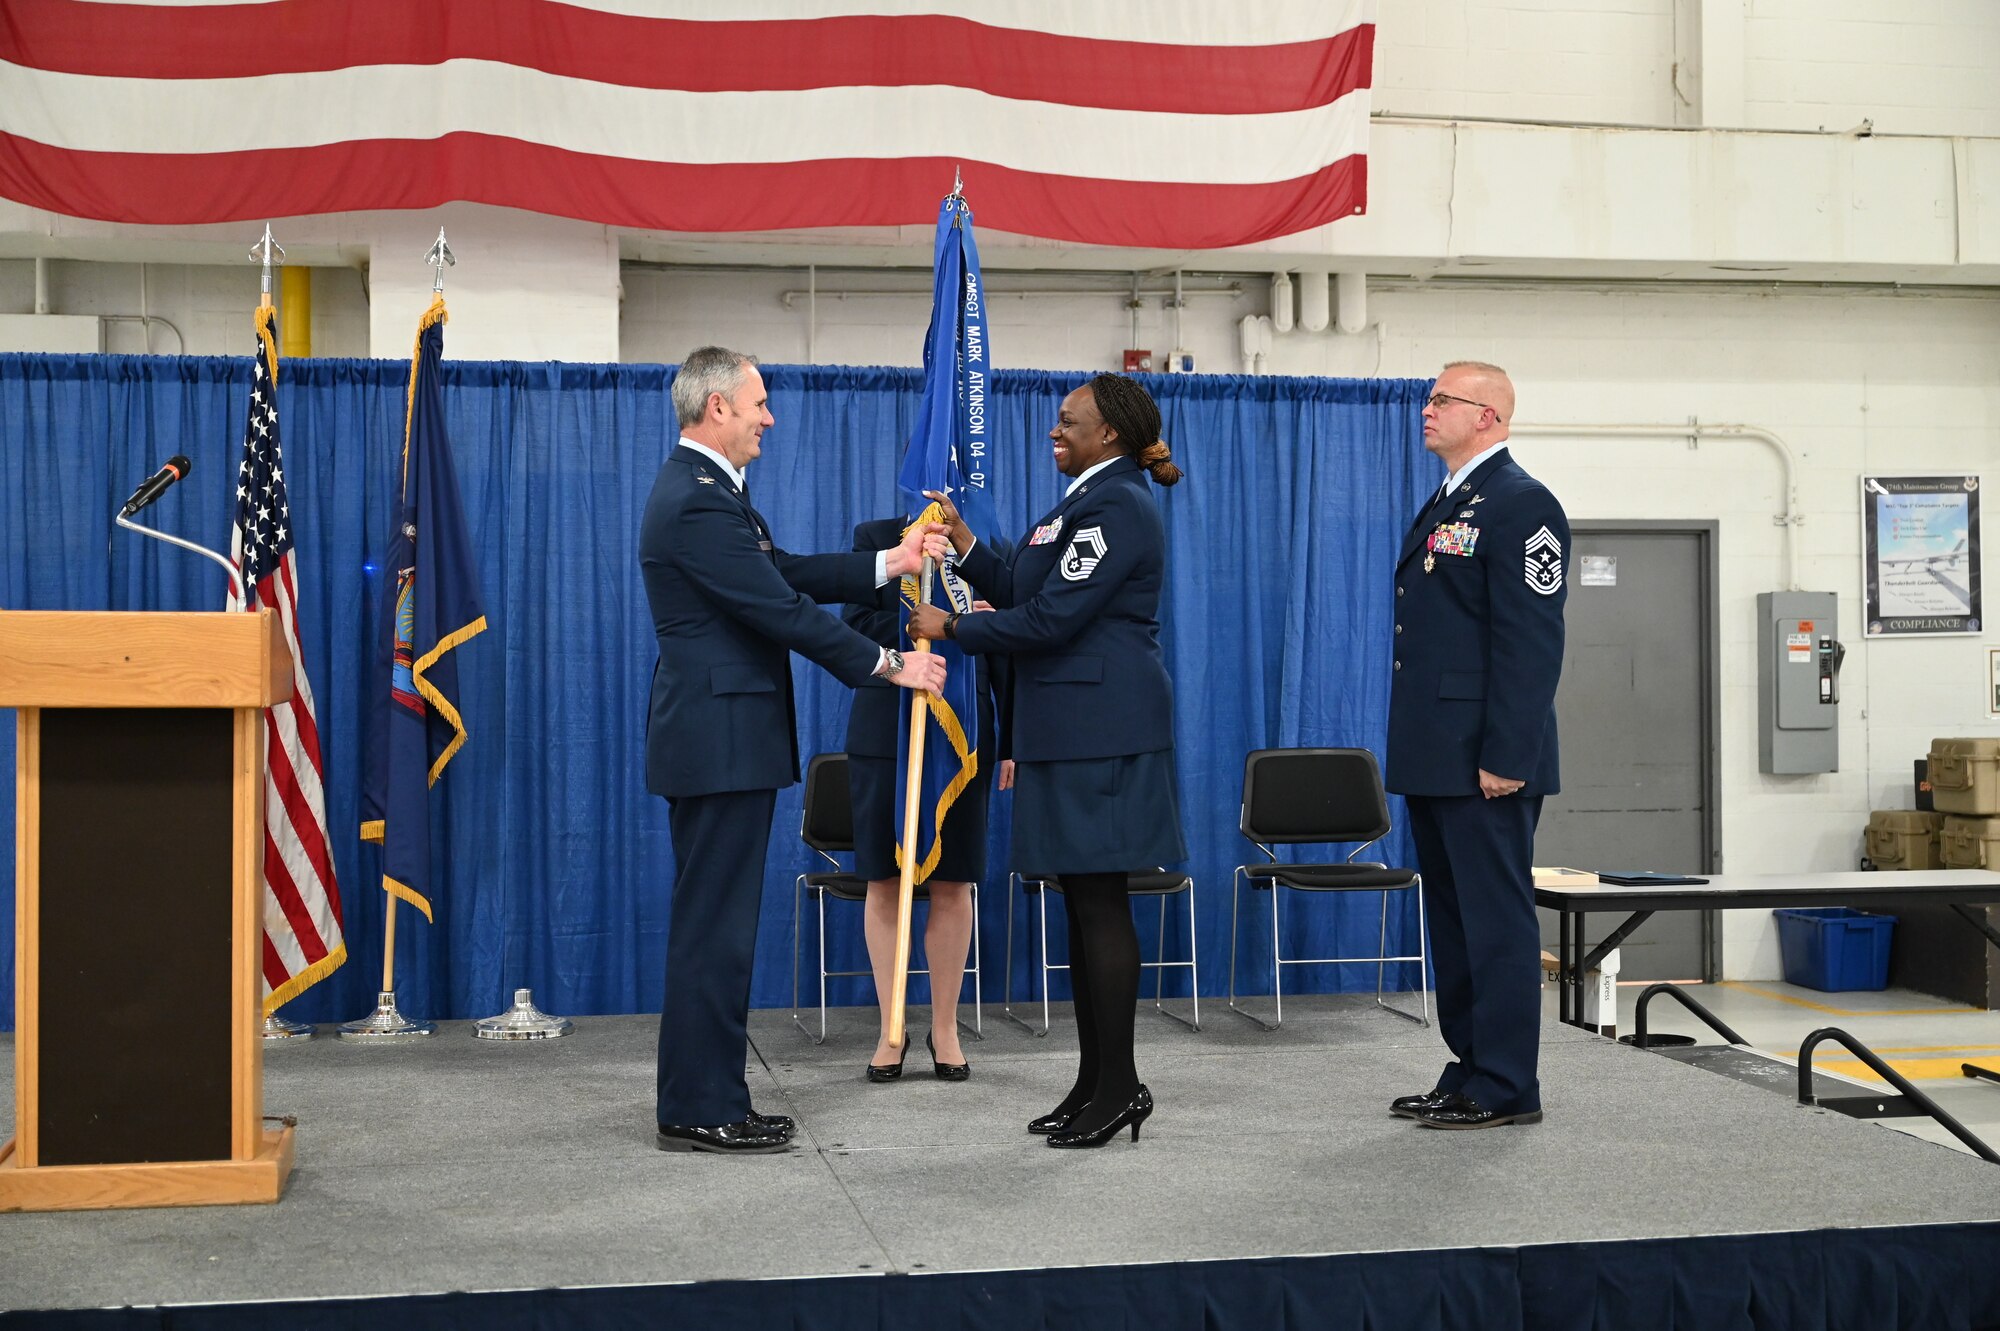 174th Attack Wing Chief Master Sgt. Sonja A. Williams becomes the new Command Chief during a ceremony at Hancock Field Air National Guard Base Feb. 4, 2022.  Chief Williams is the first female command chief at the 174th. (U.S. Air National Guard photo by Senior Amn Tiffany Scofield)